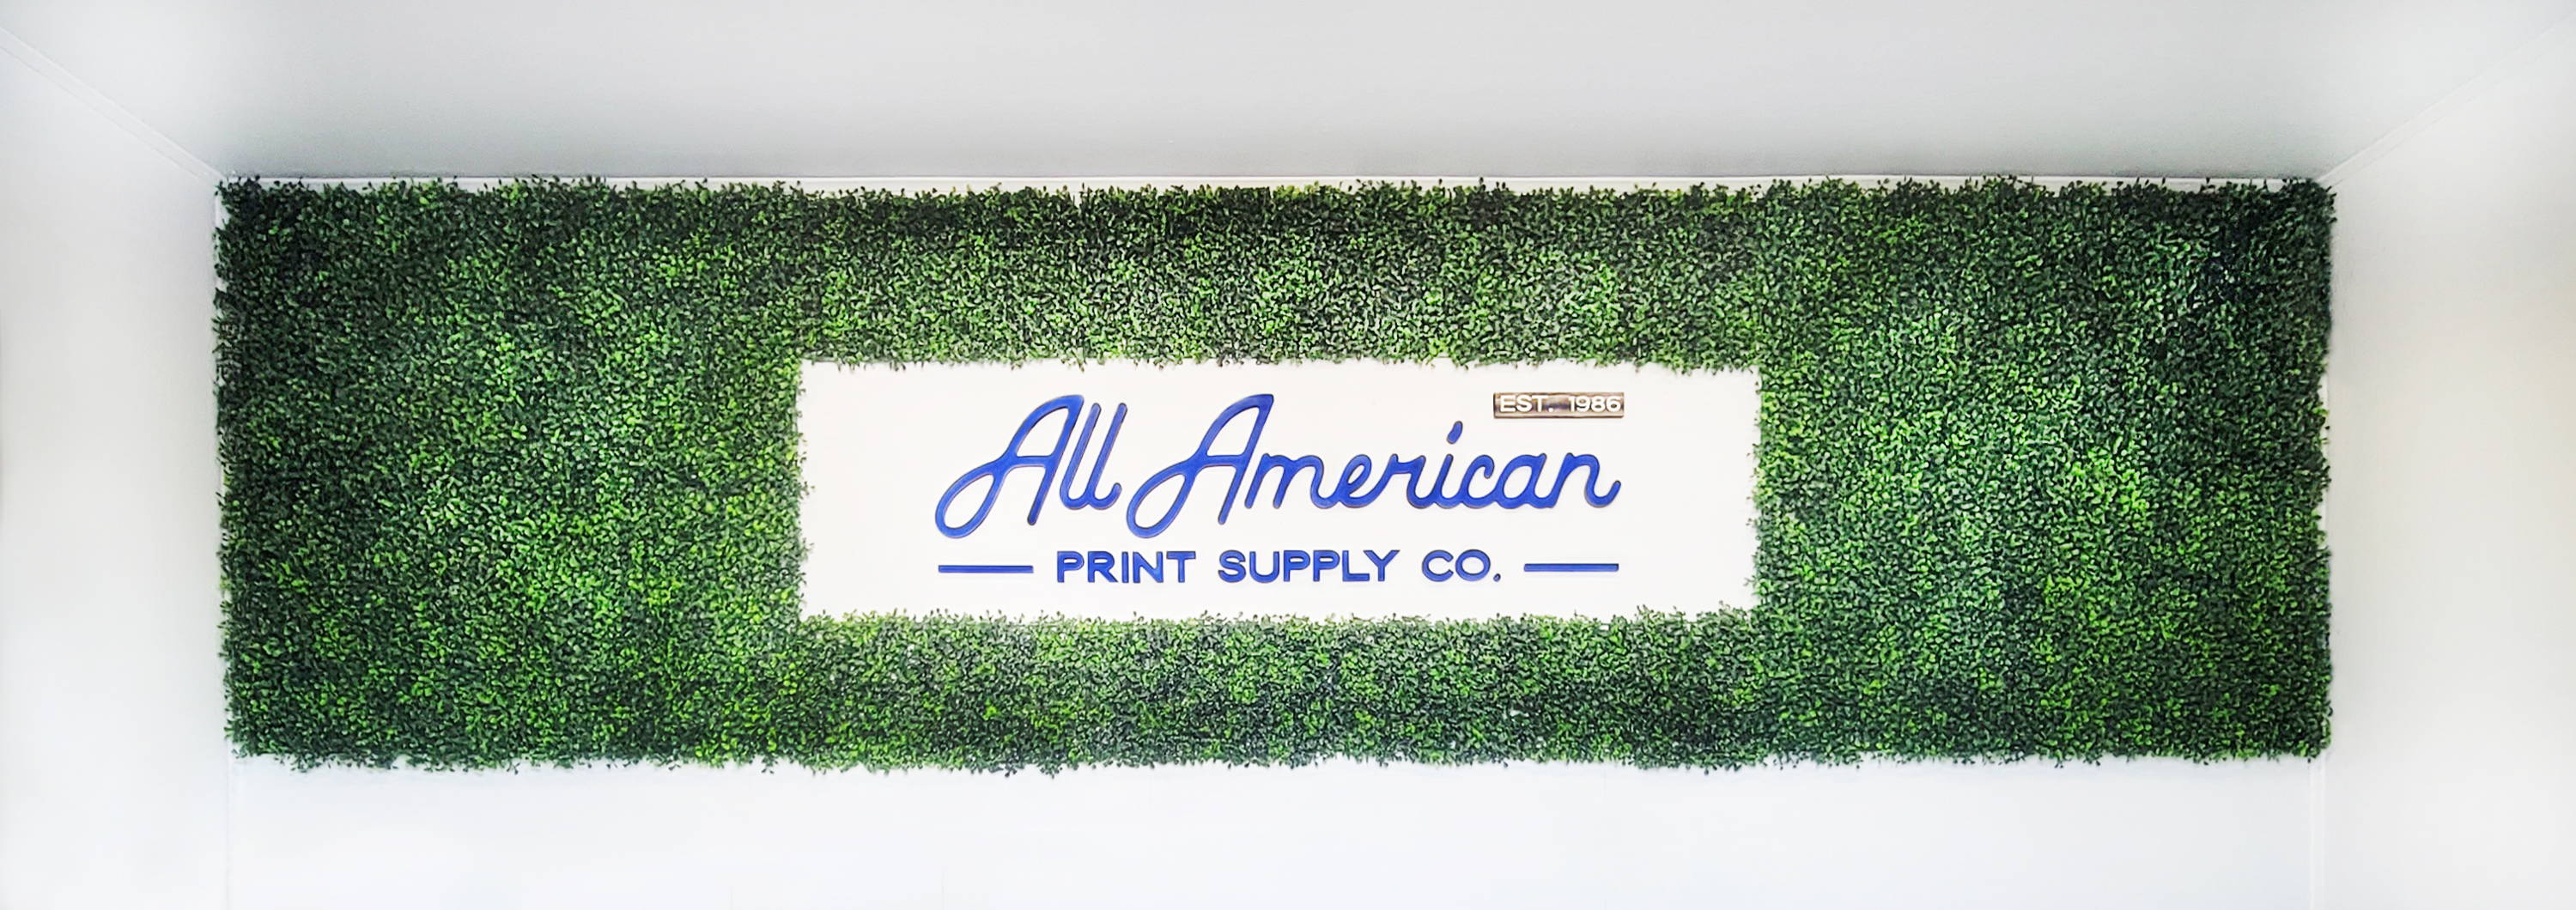 all american print supply co. grass banner.